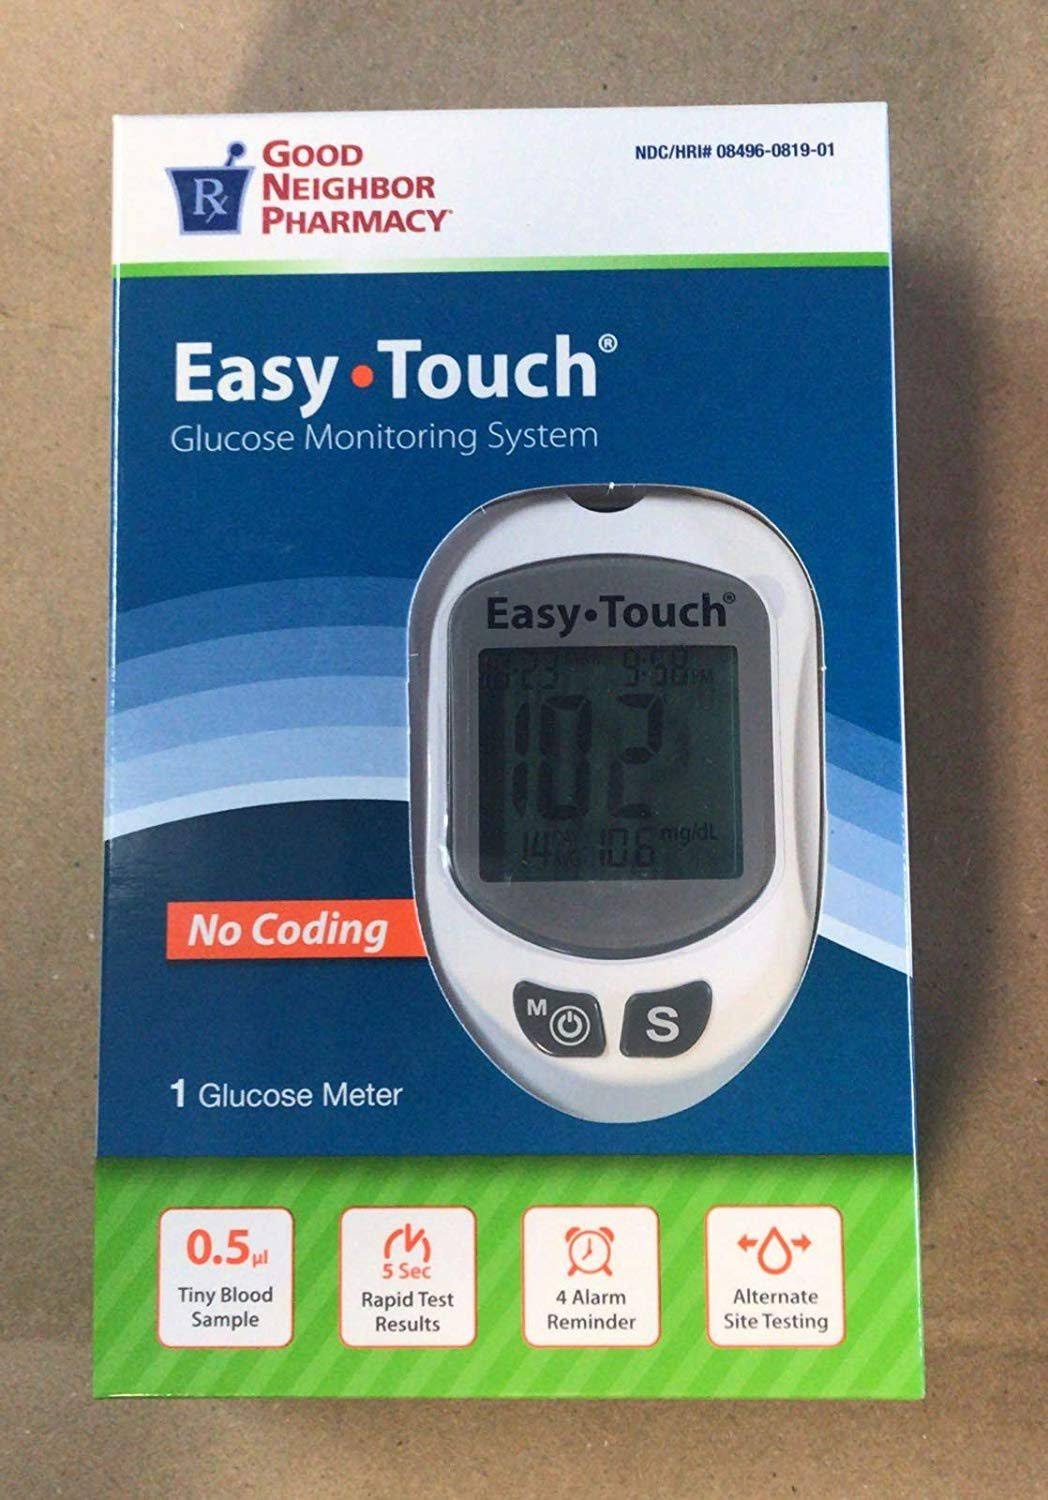 Good Neighbor Pharmacy Easy Touch Glucose Monitoring System